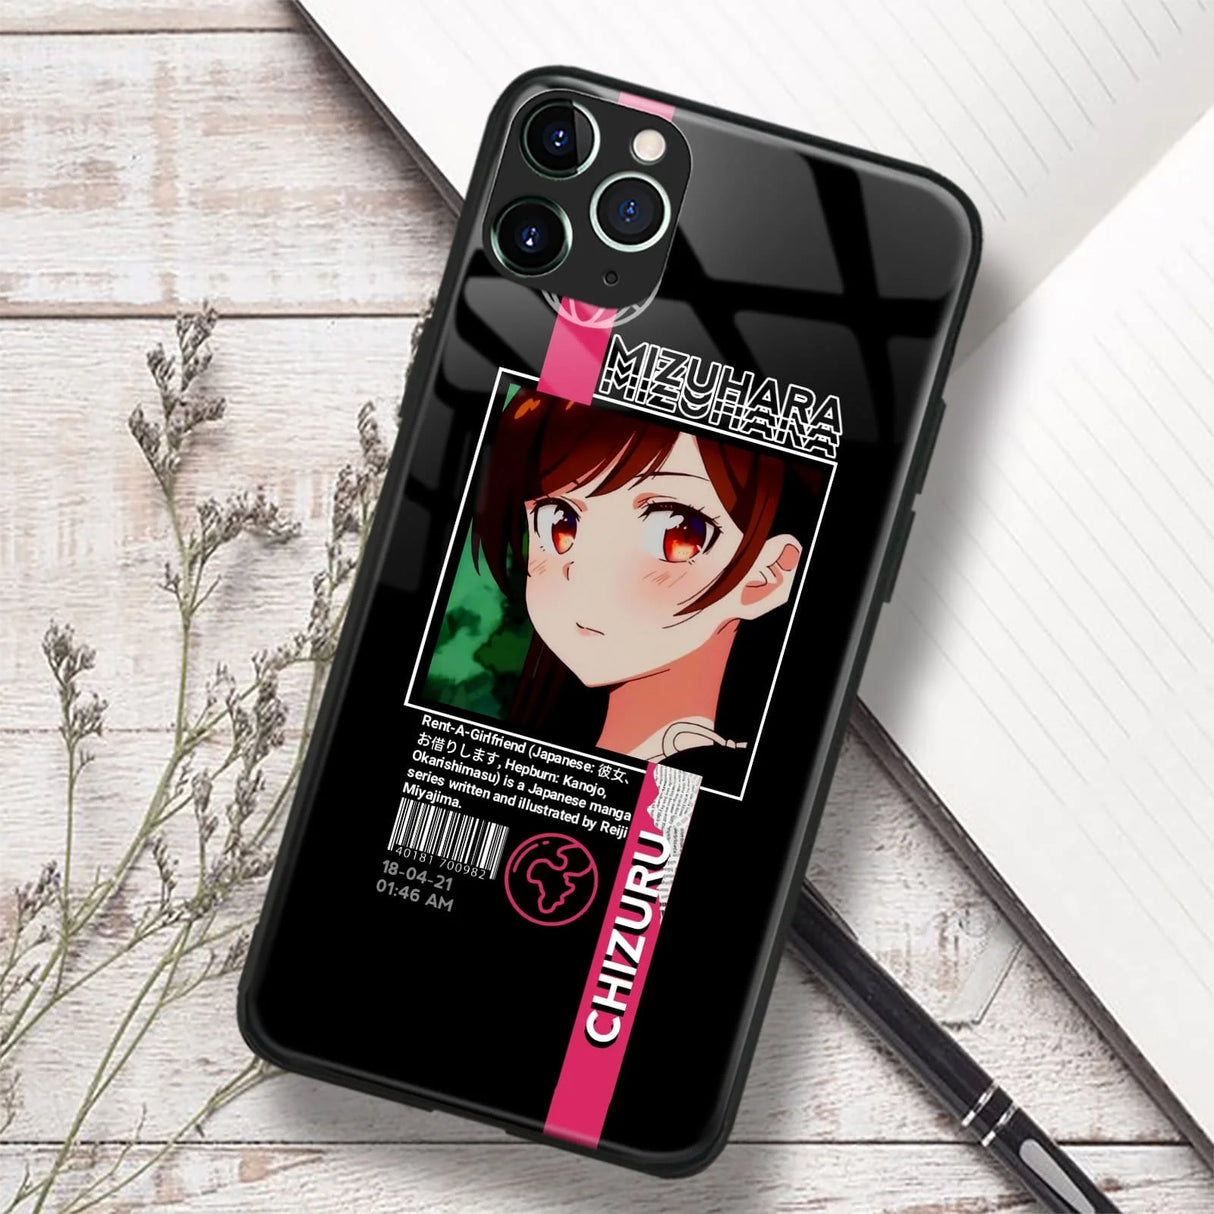 This case is unique designed for anime lovers for charming Chizuru. | If you are looking for more Rent A Girlfriend Merch, We have it all! | Check out all our Anime Merch now!